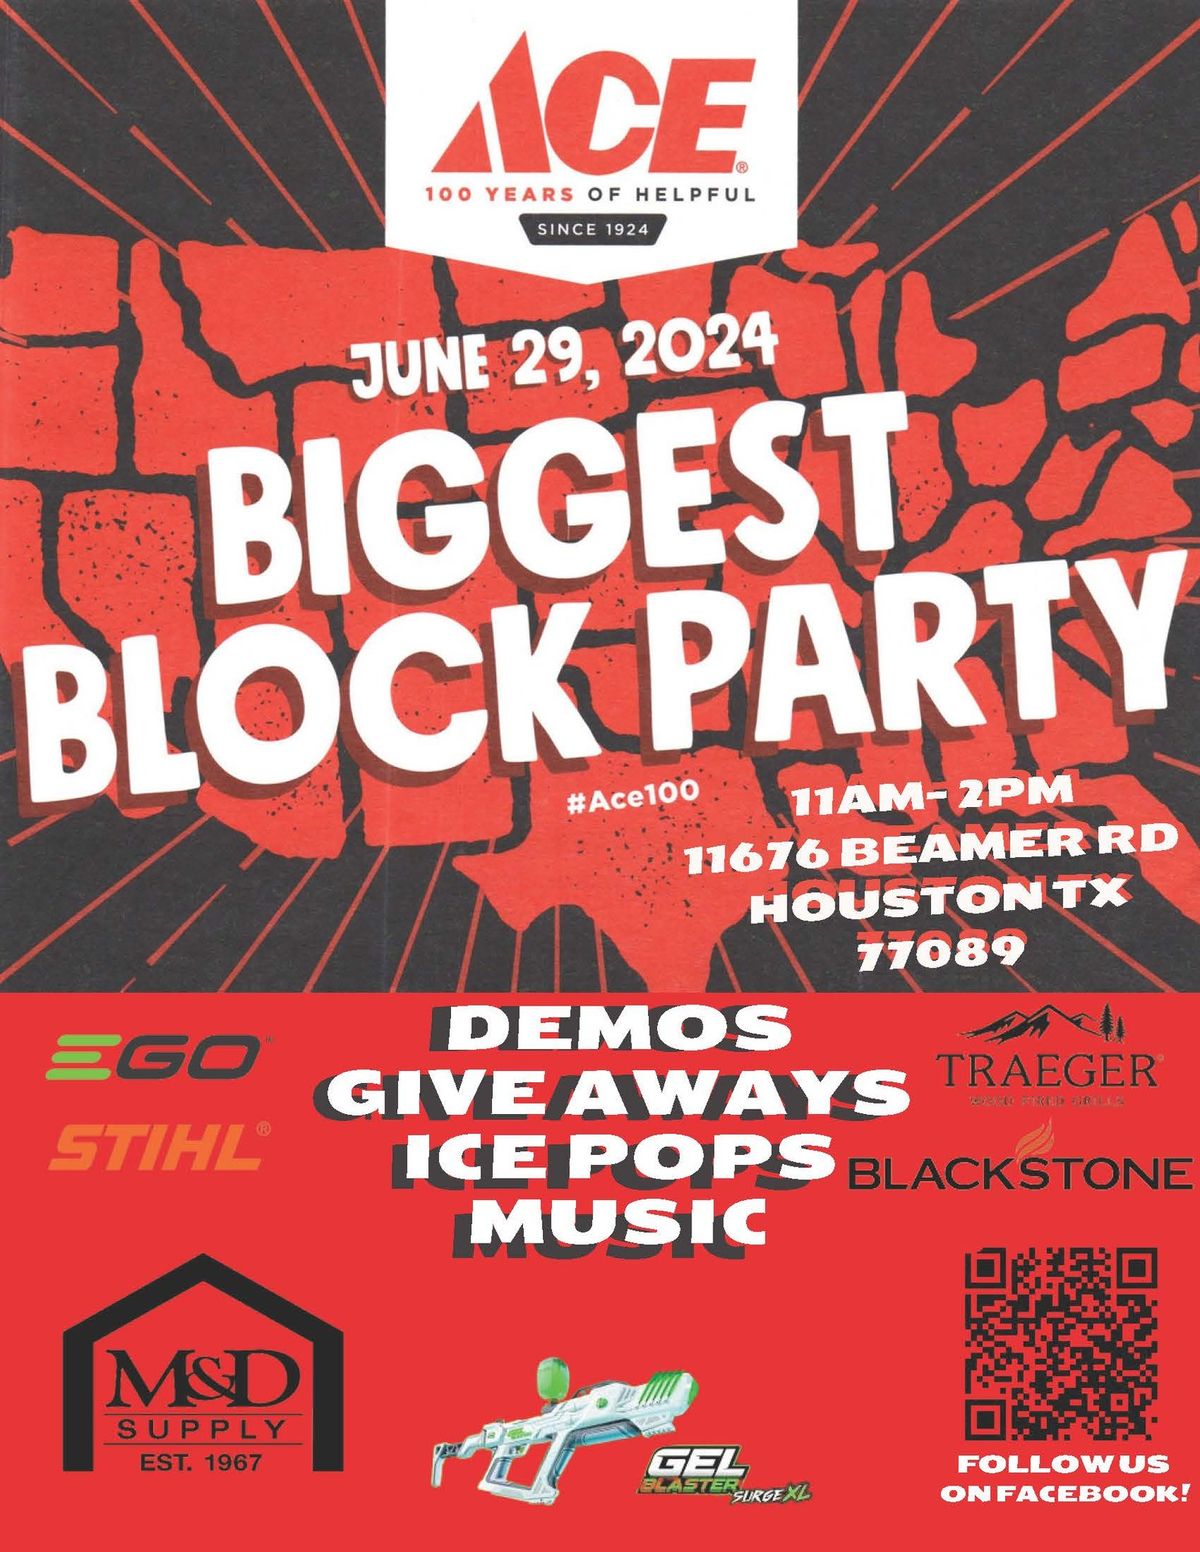 M&D Supply Block Party on Beamer Rd.